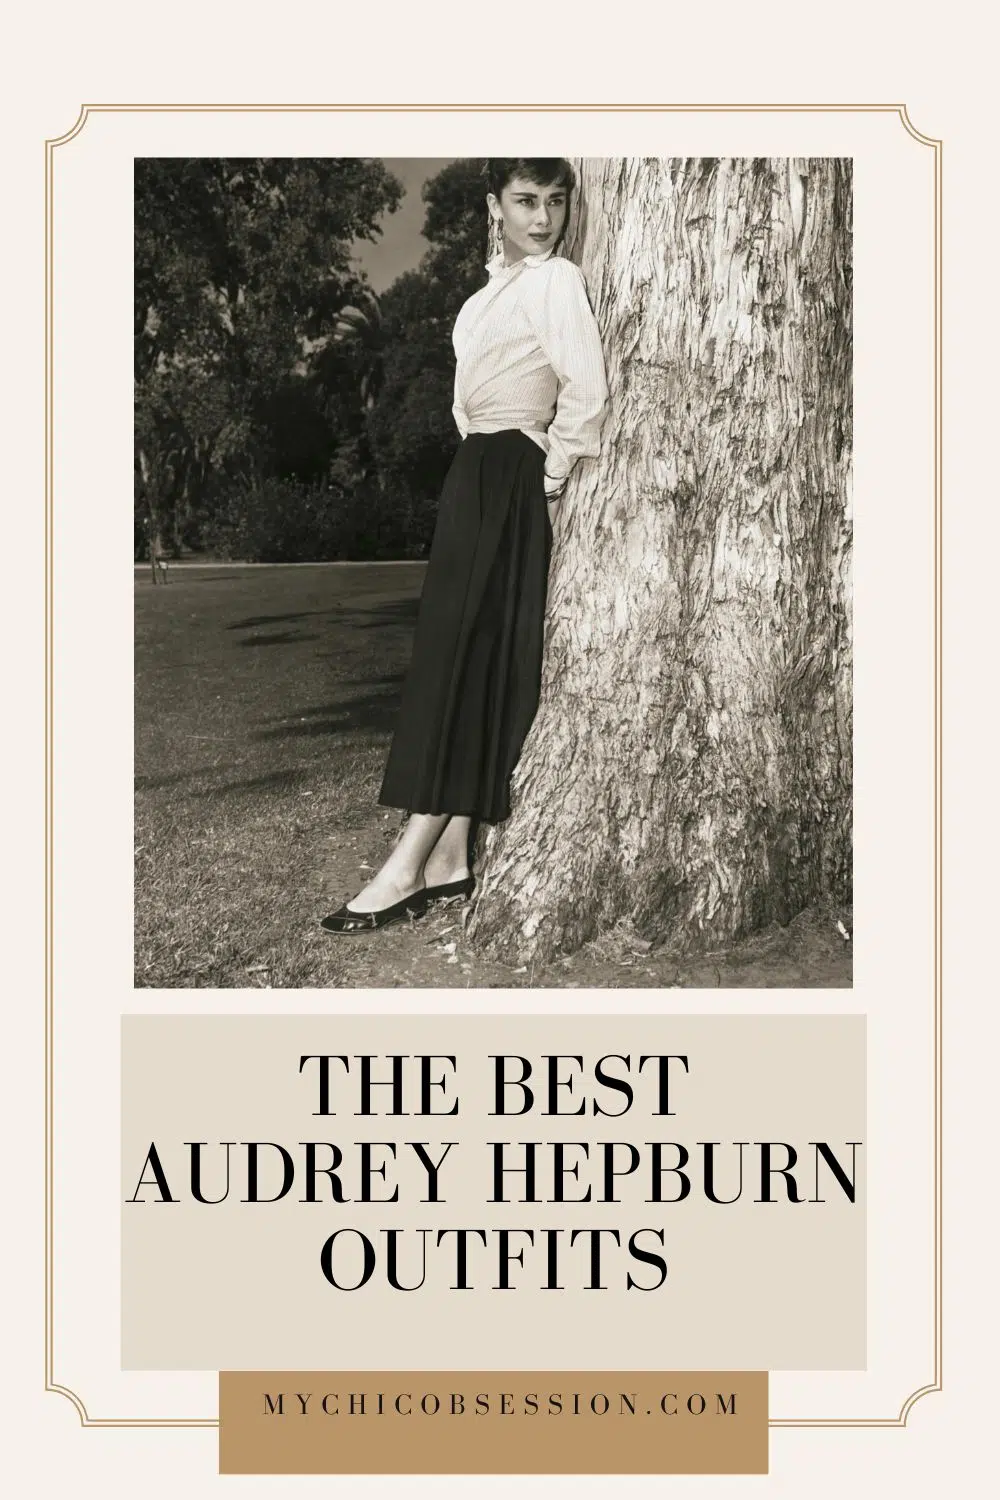 The best Audrey Hepburn outfits